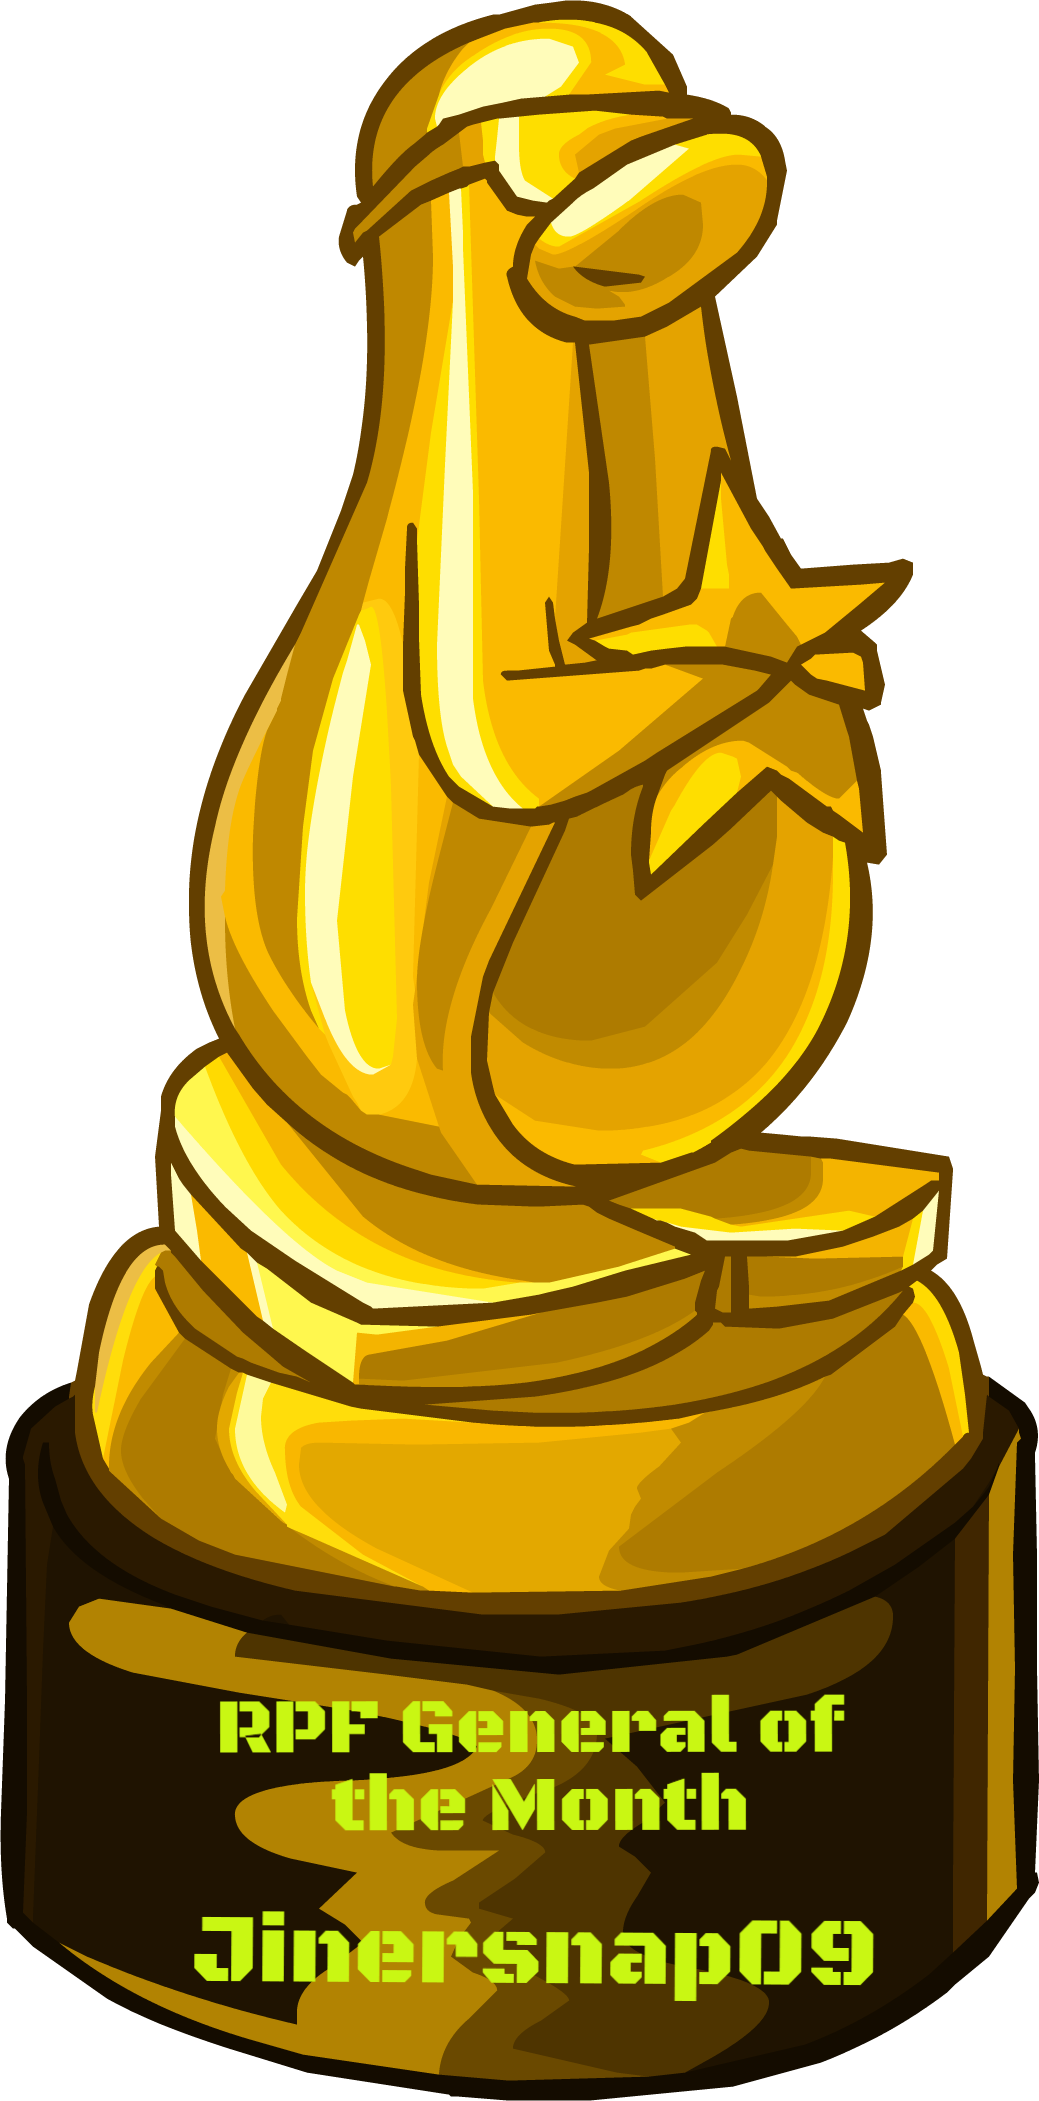 Roboman And Jingersnap And To All Rpf Members And Mods - Club Penguin Penguin Award (1039x2101)